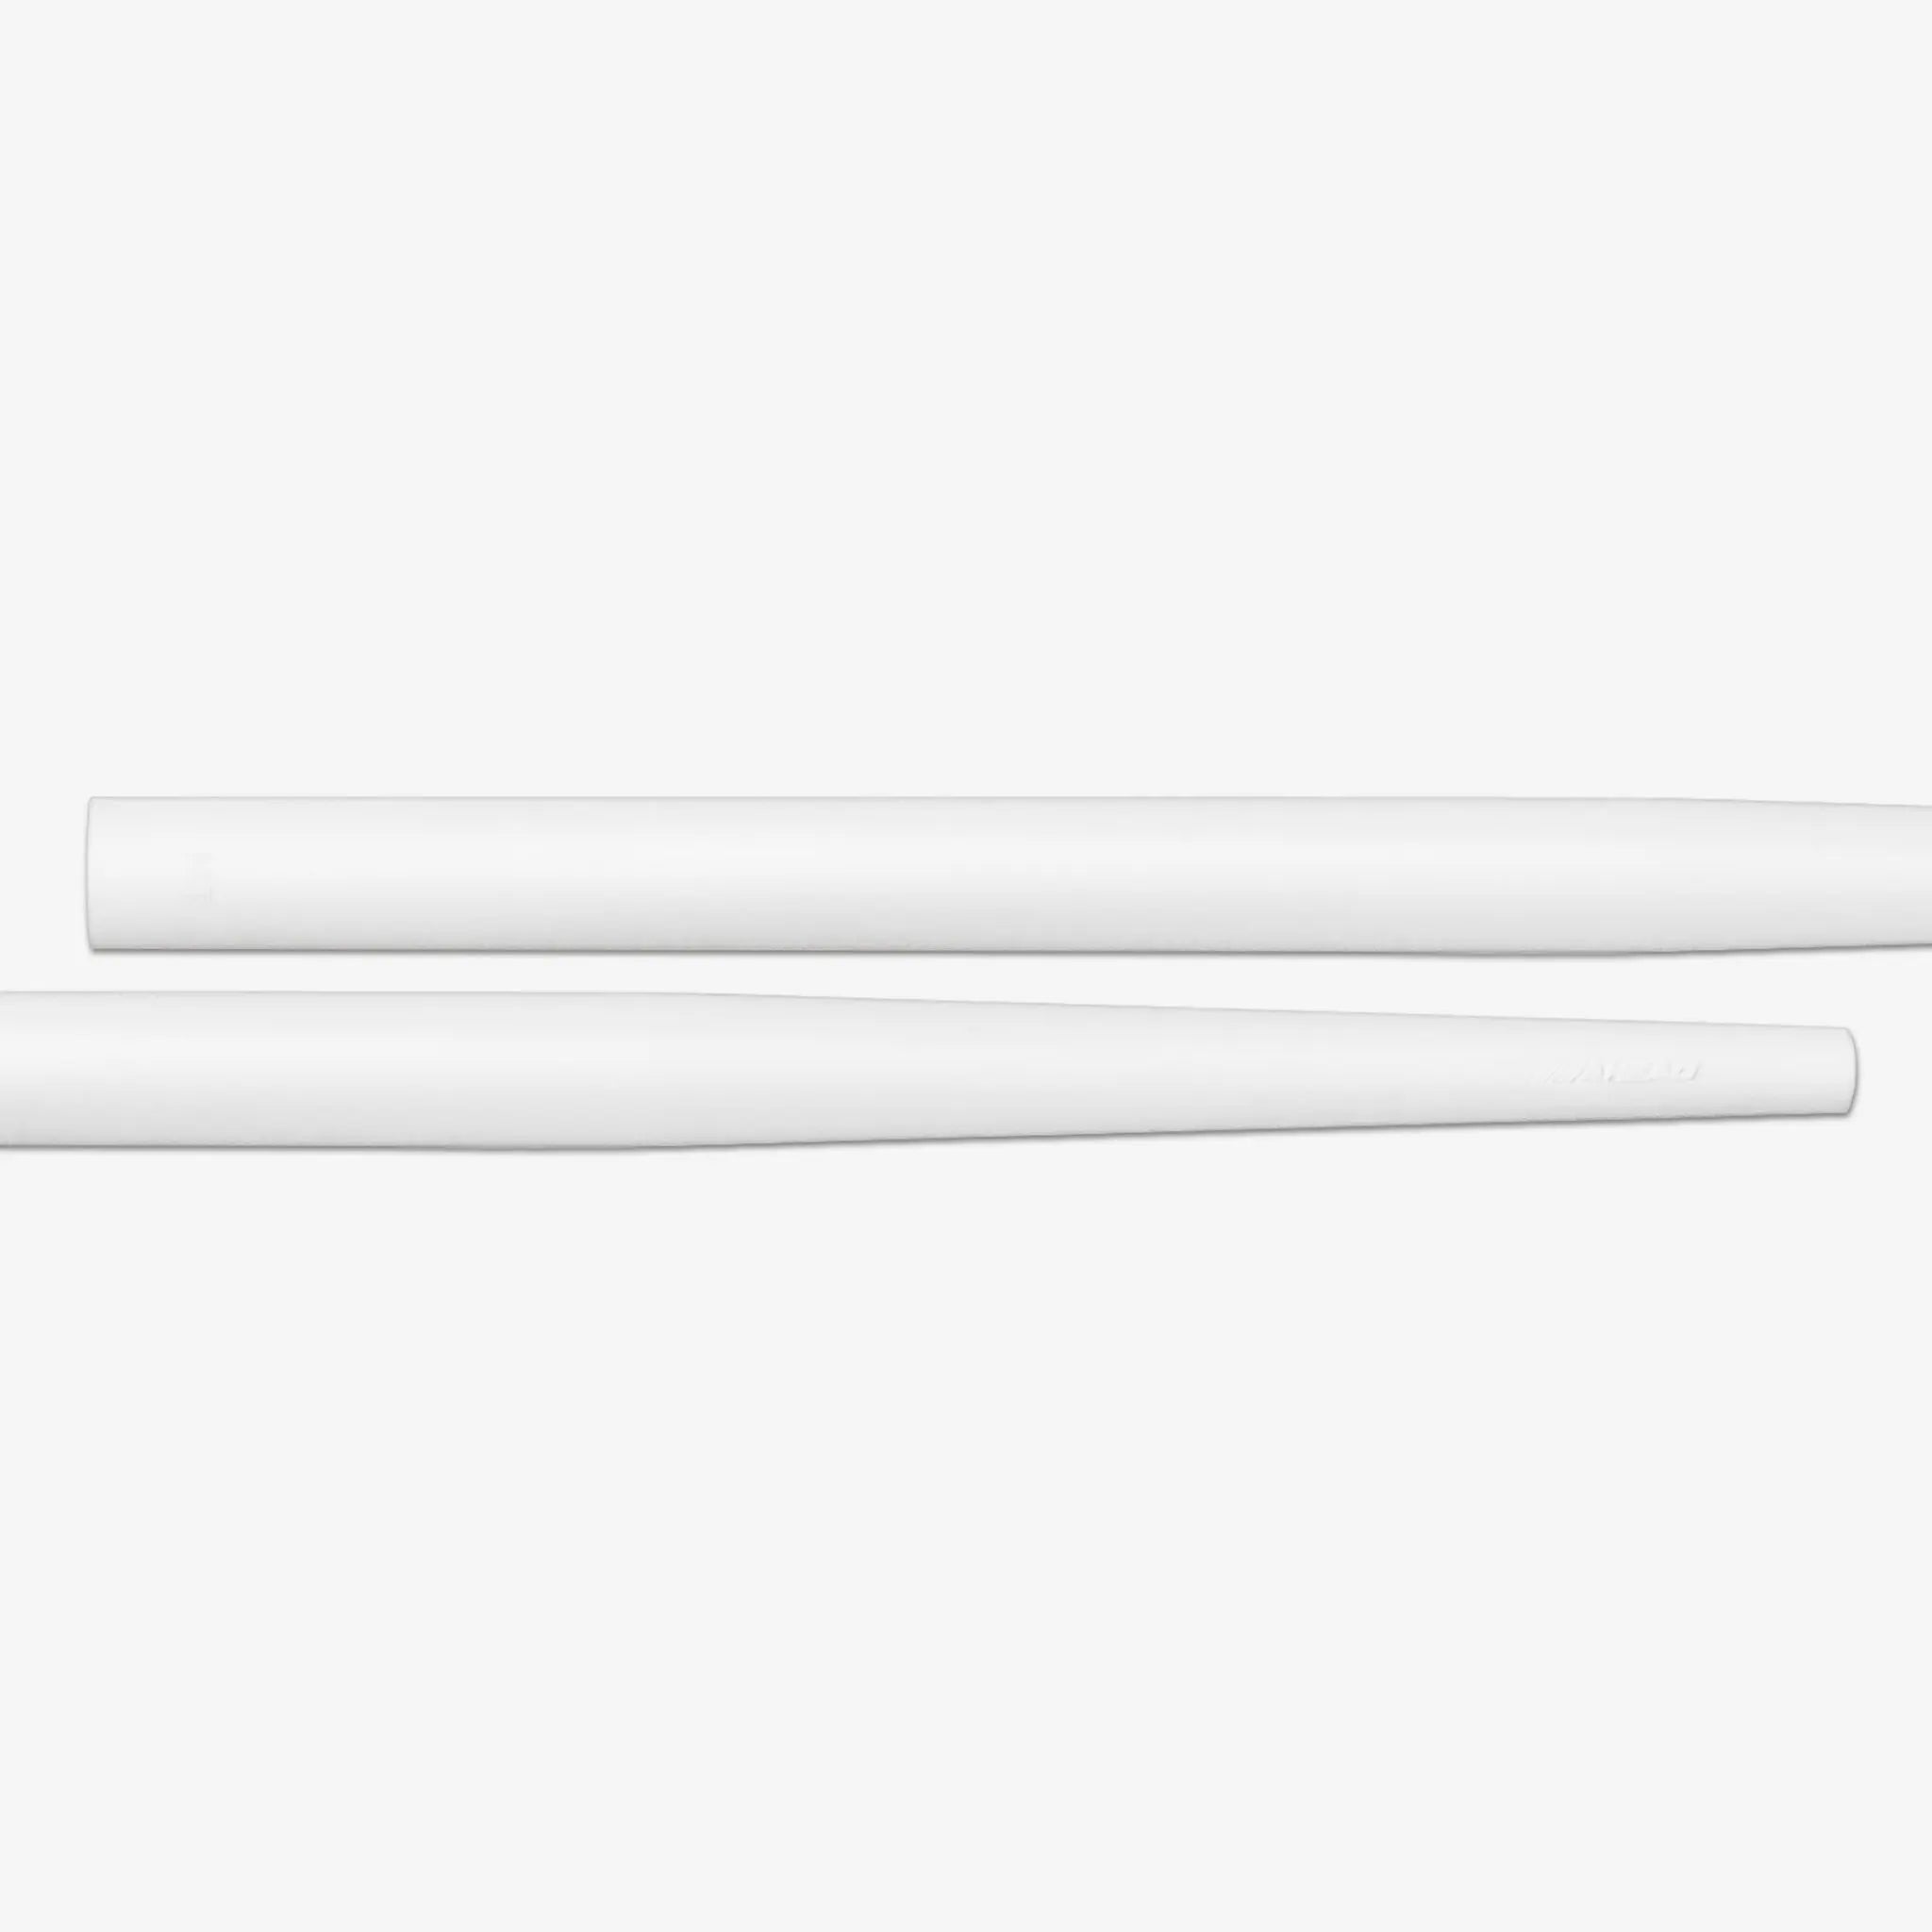 Ahead Drum Sticks Long Taper Replacement Covers, White (LTW) DRUM STICKS Ahead 